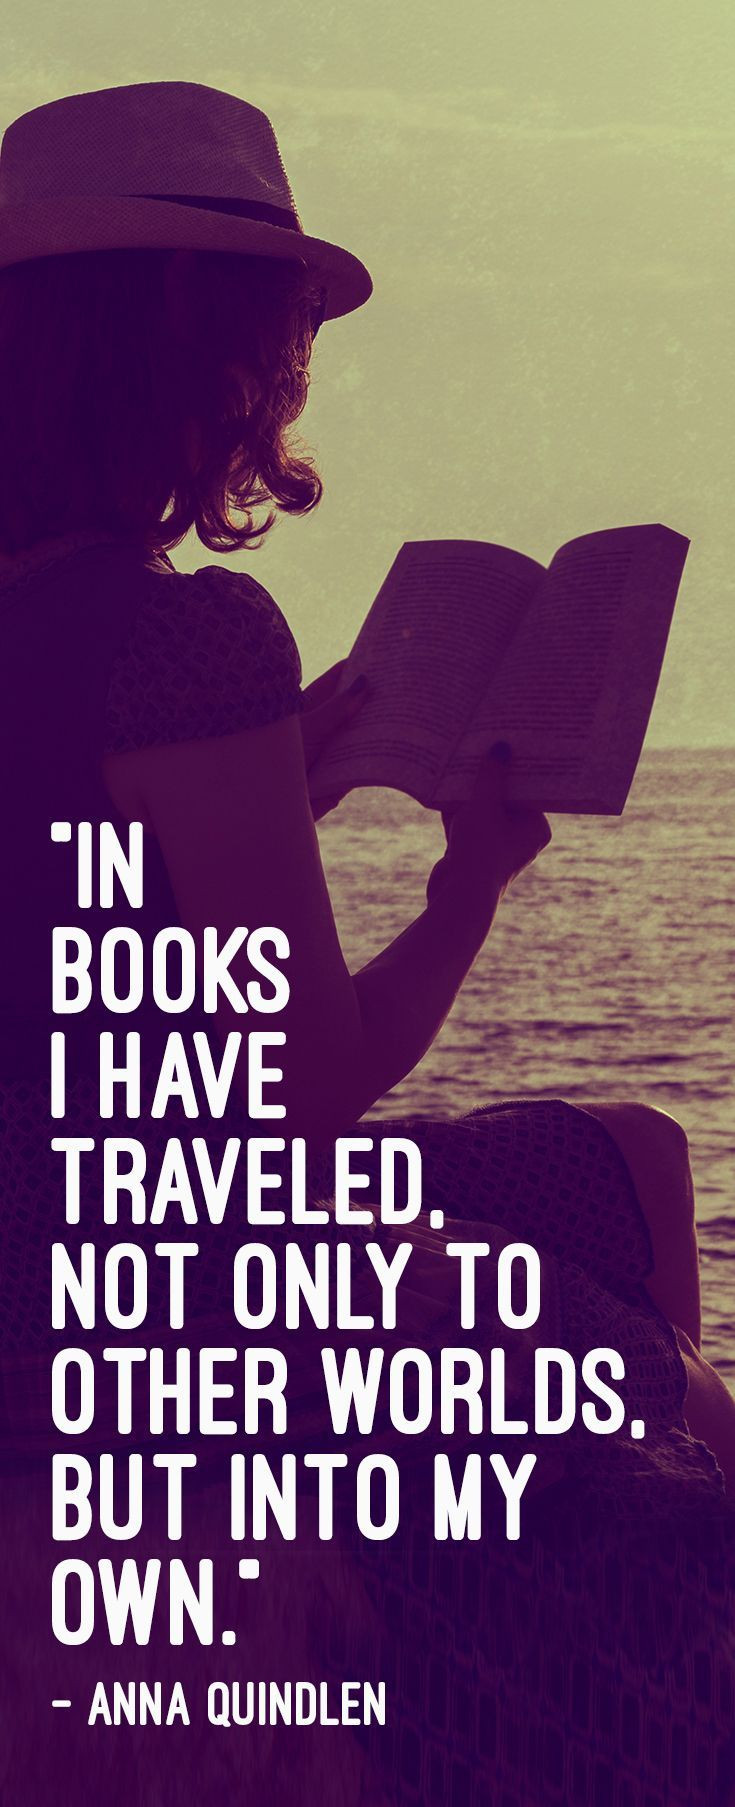 Inspirational Literature Quotes
 Best 25 Quotes about reading ideas on Pinterest